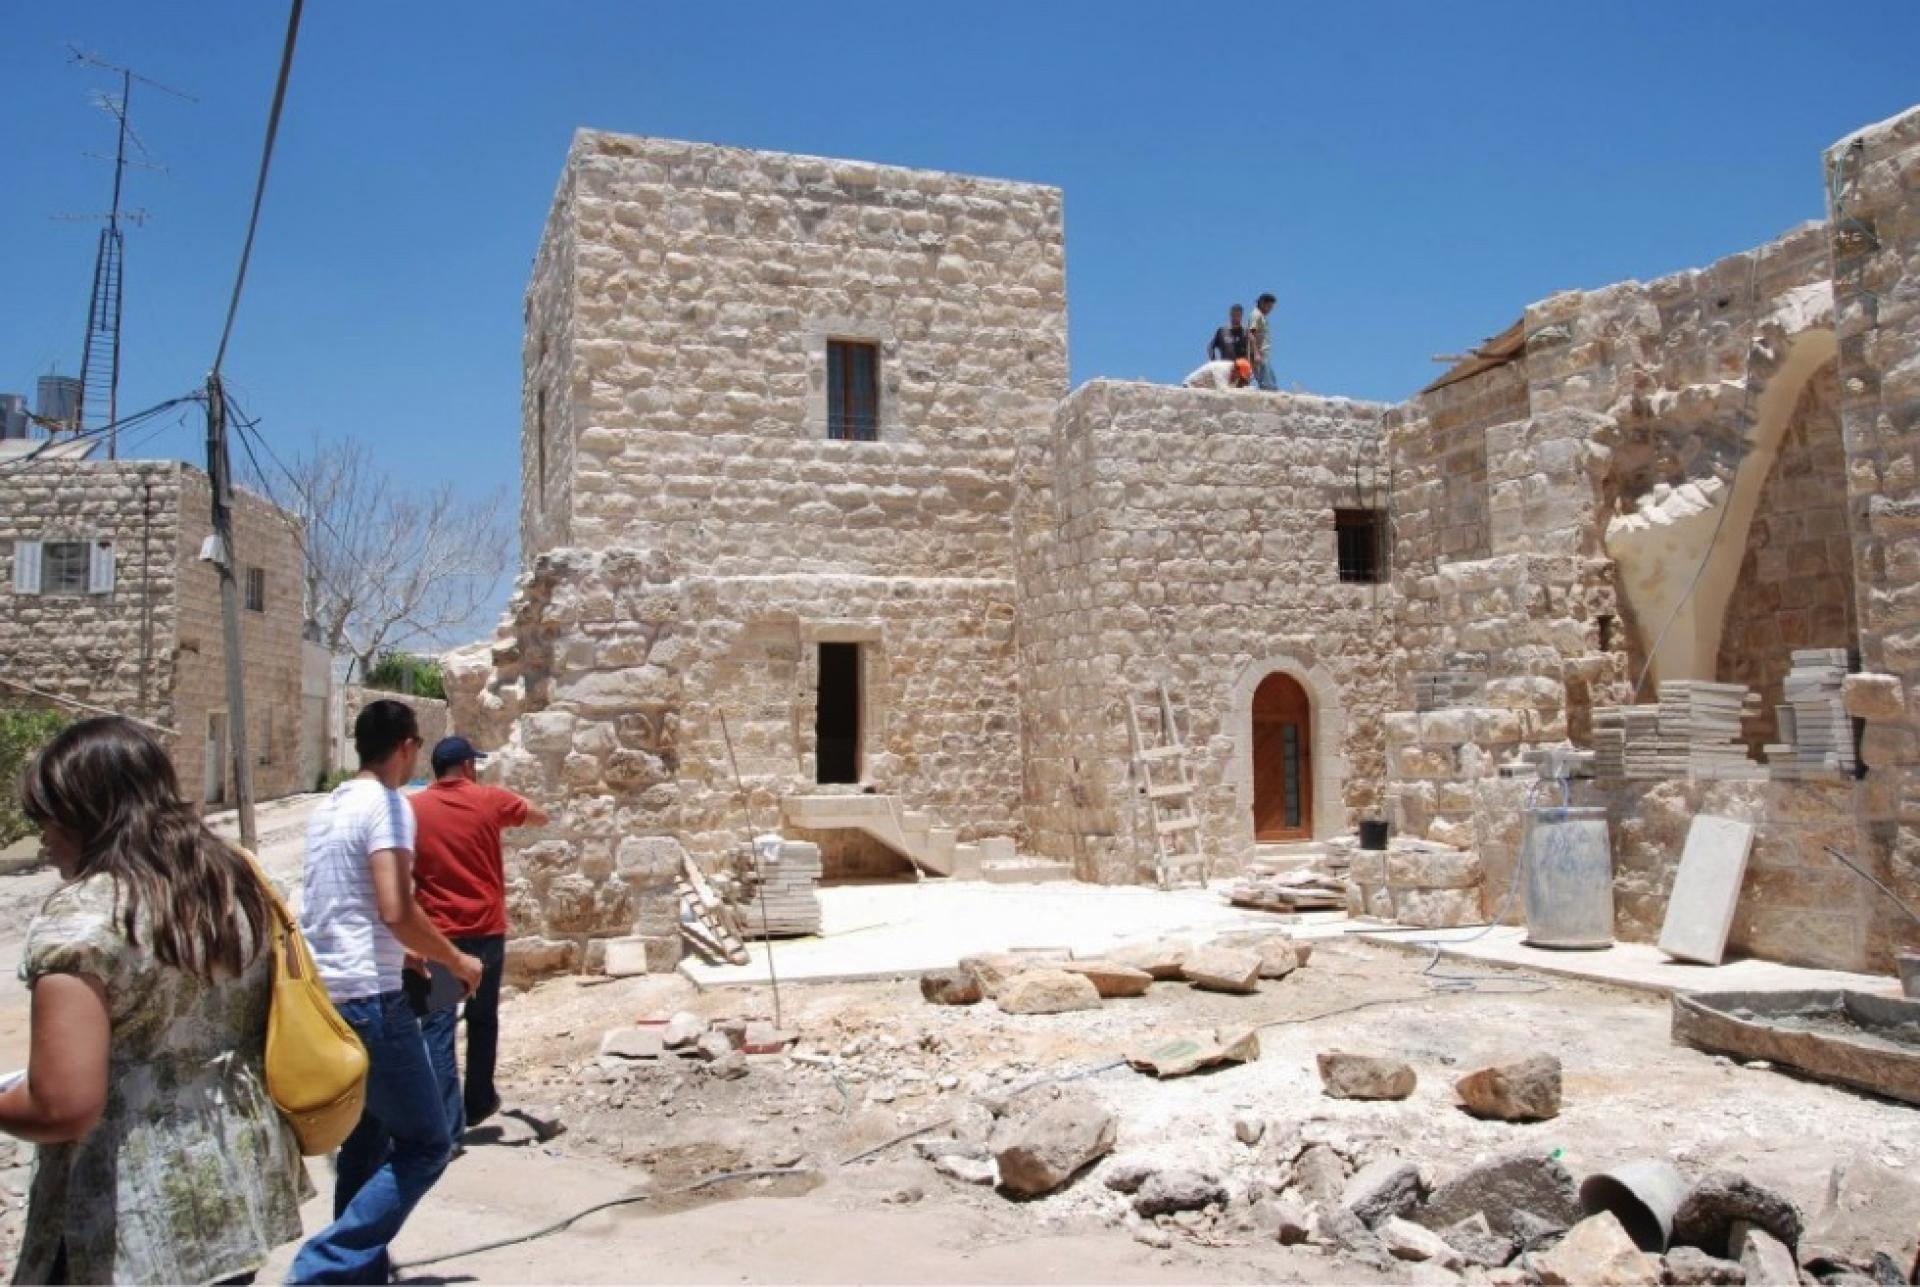 The renovation of Birzeit’s historic centre by Riwaq was done through physical restoration and innovative activities. | Photo via Spatial Agency